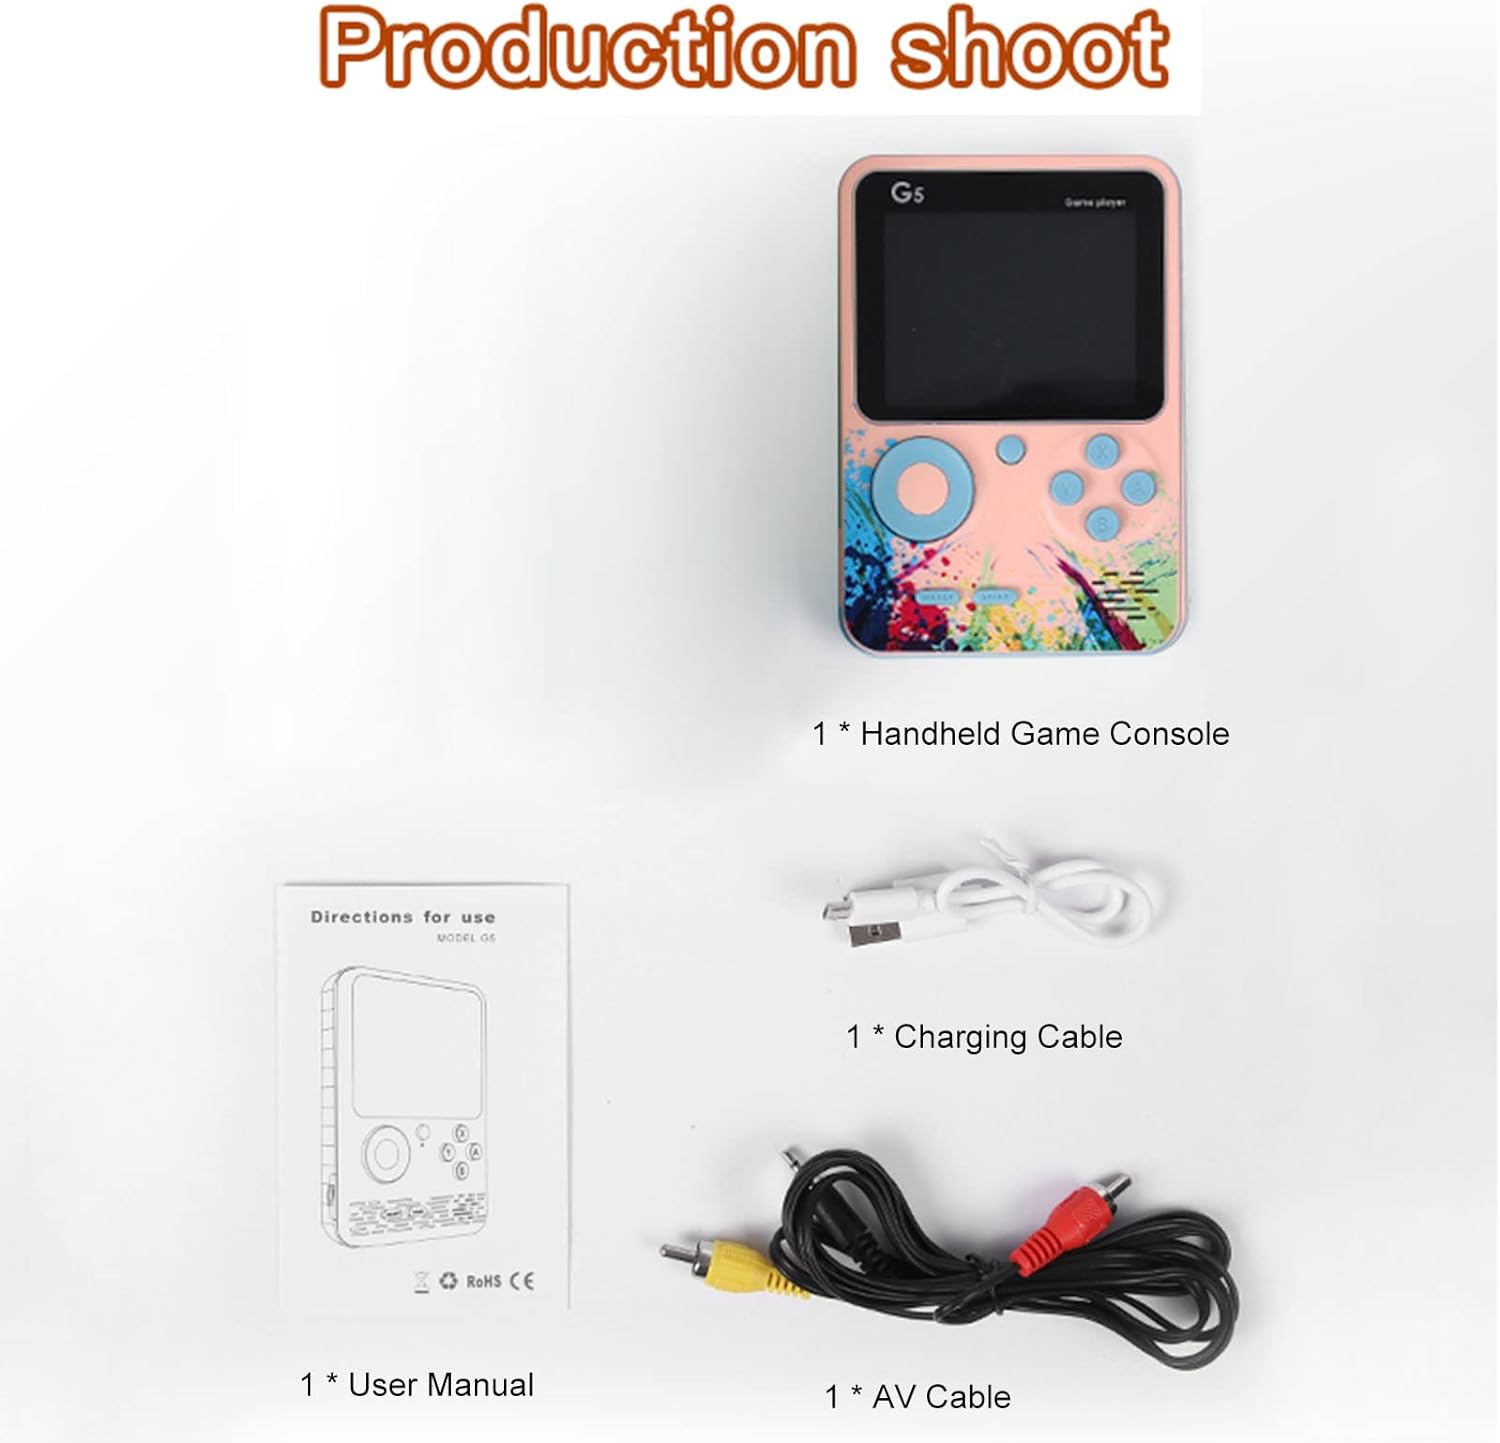 G5 3.0 Inch Full-color Screen Game Console With 500